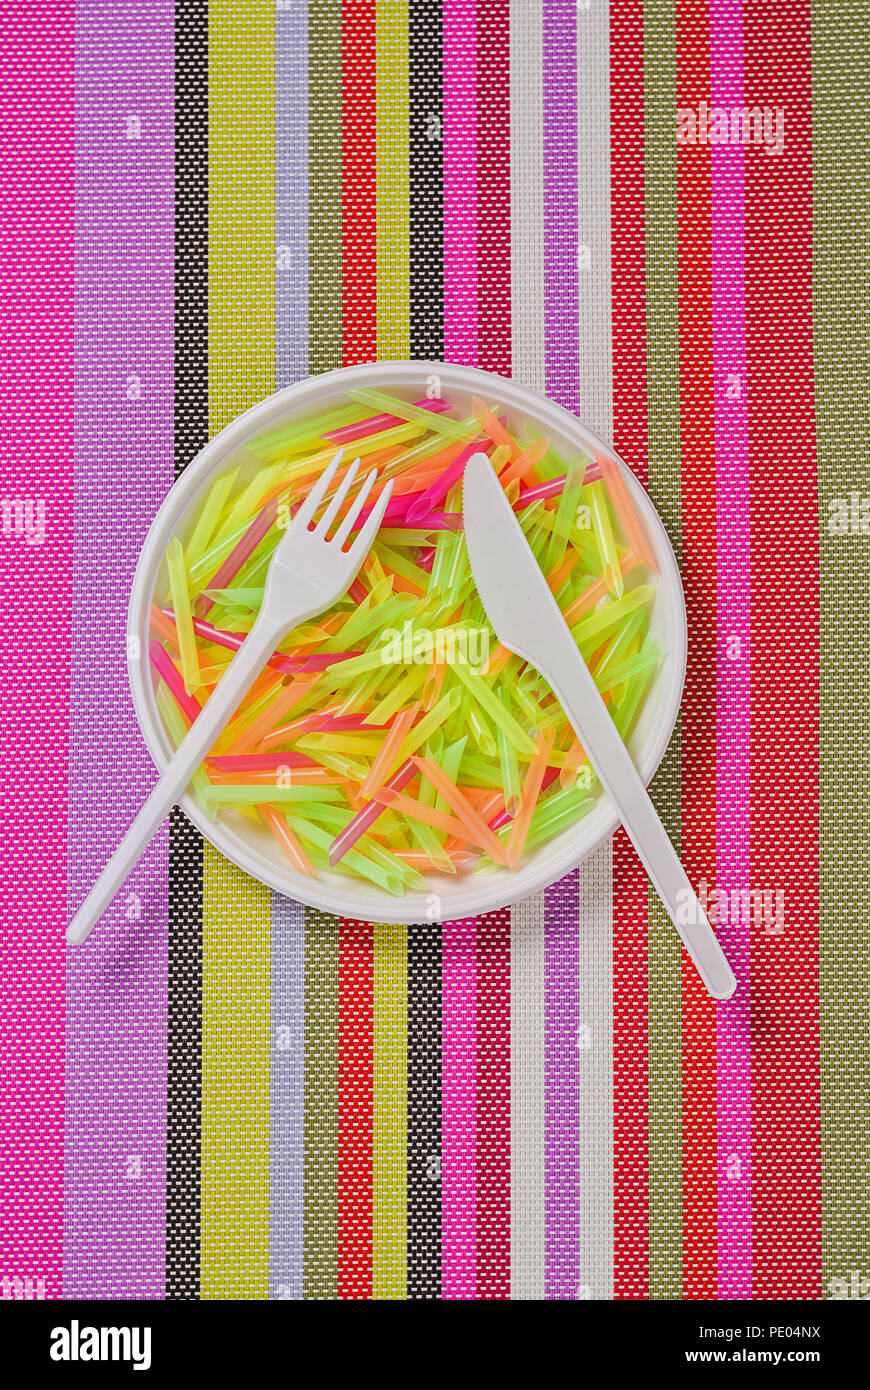 plate, fork, knife and pasta from plastic on a colored striped napkin Stock Photo